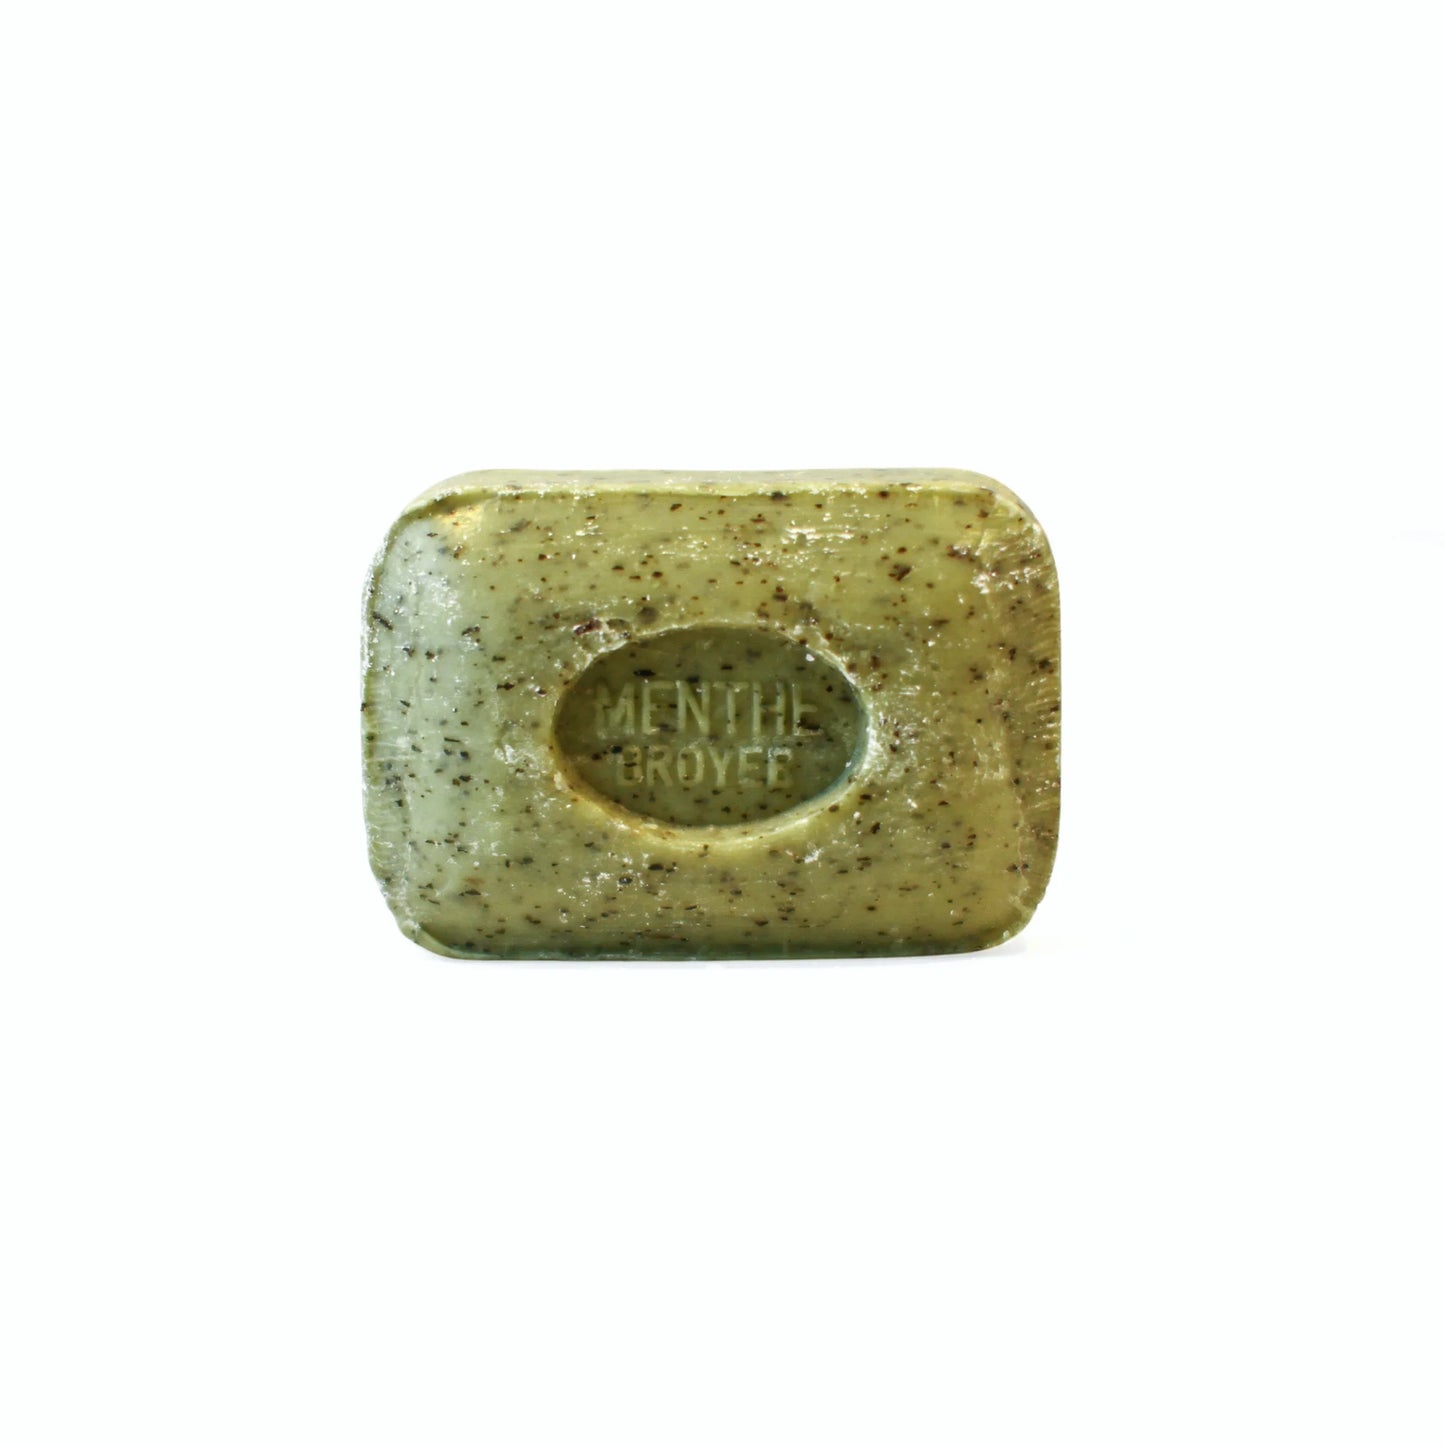 Soap 100g MENTHE BROYEE (Crushed Mint), LS